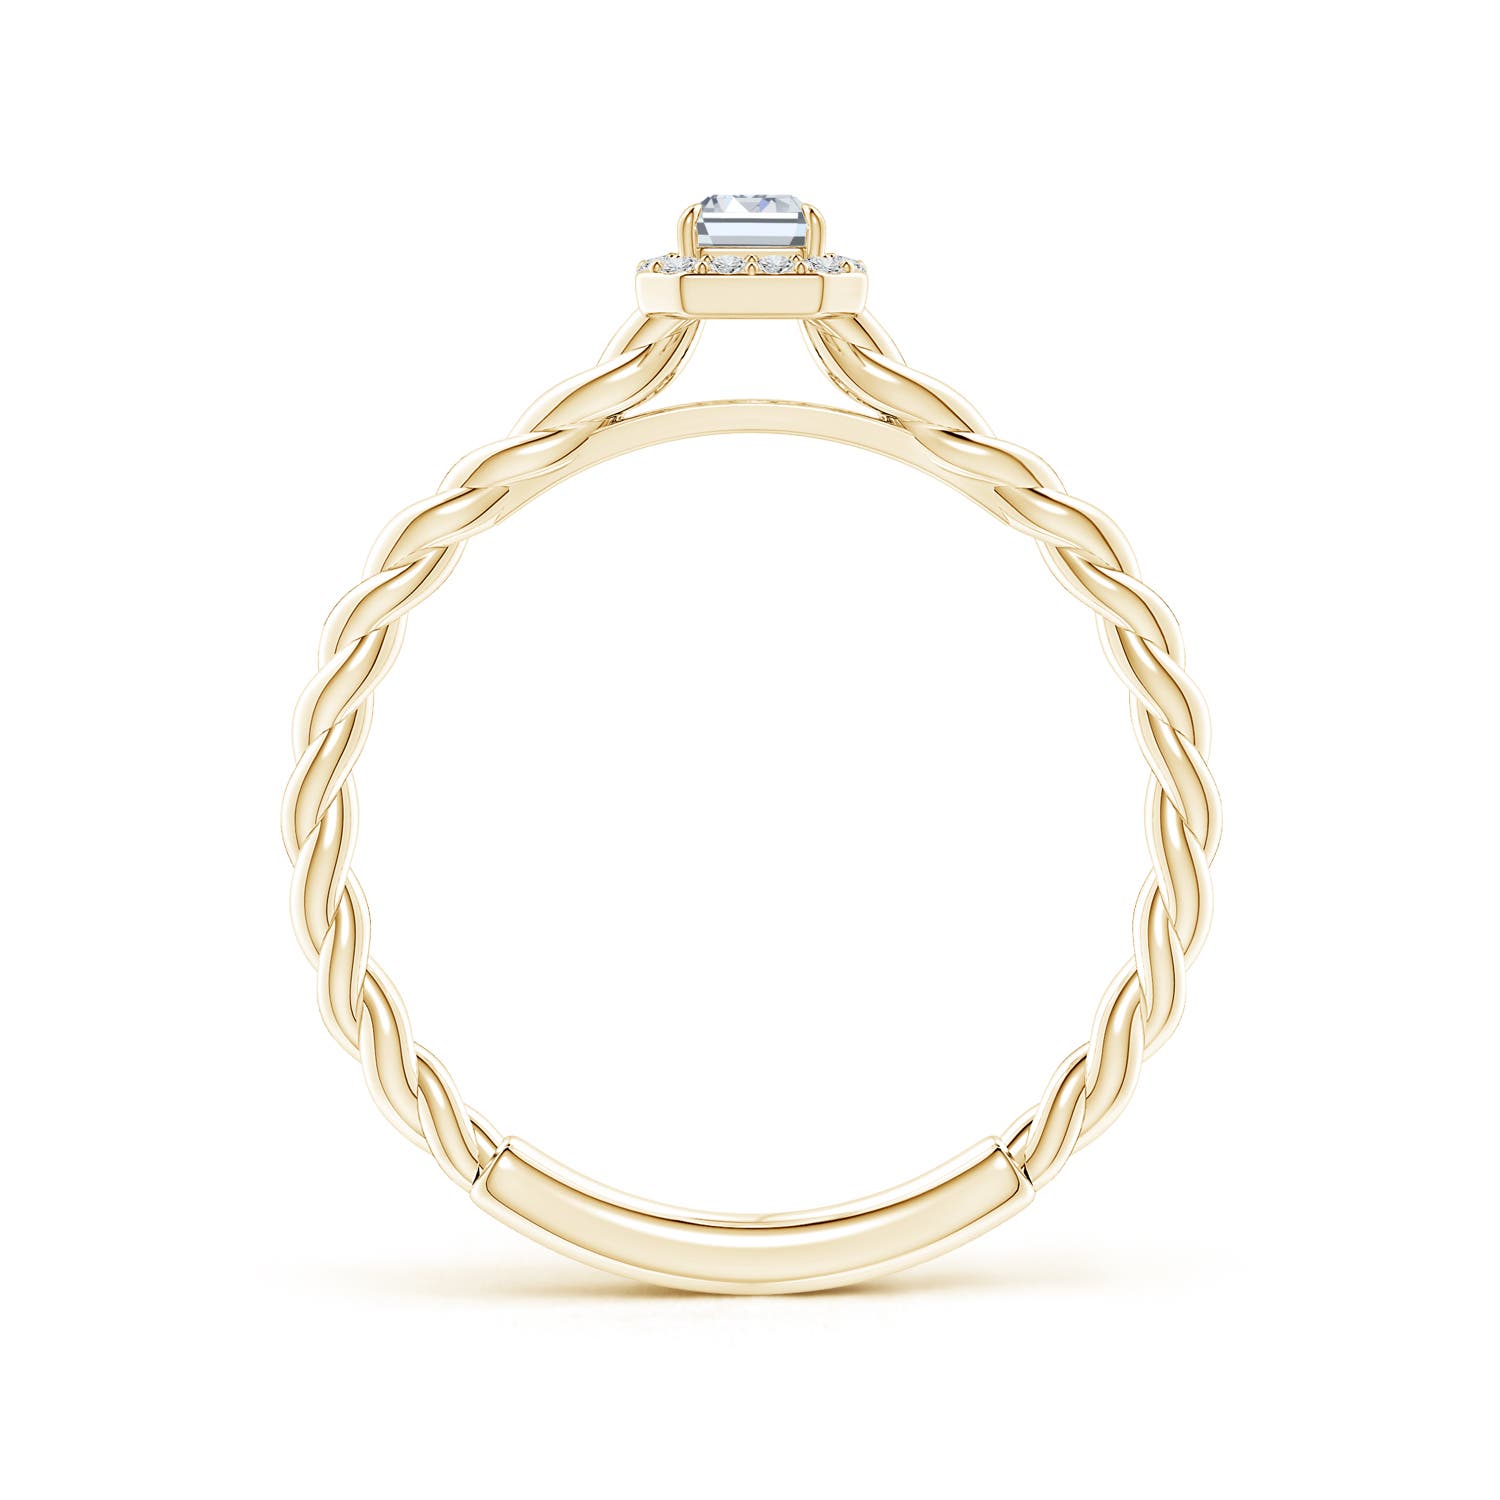 H, SI2 / 0.38 CT / 14 KT Yellow Gold